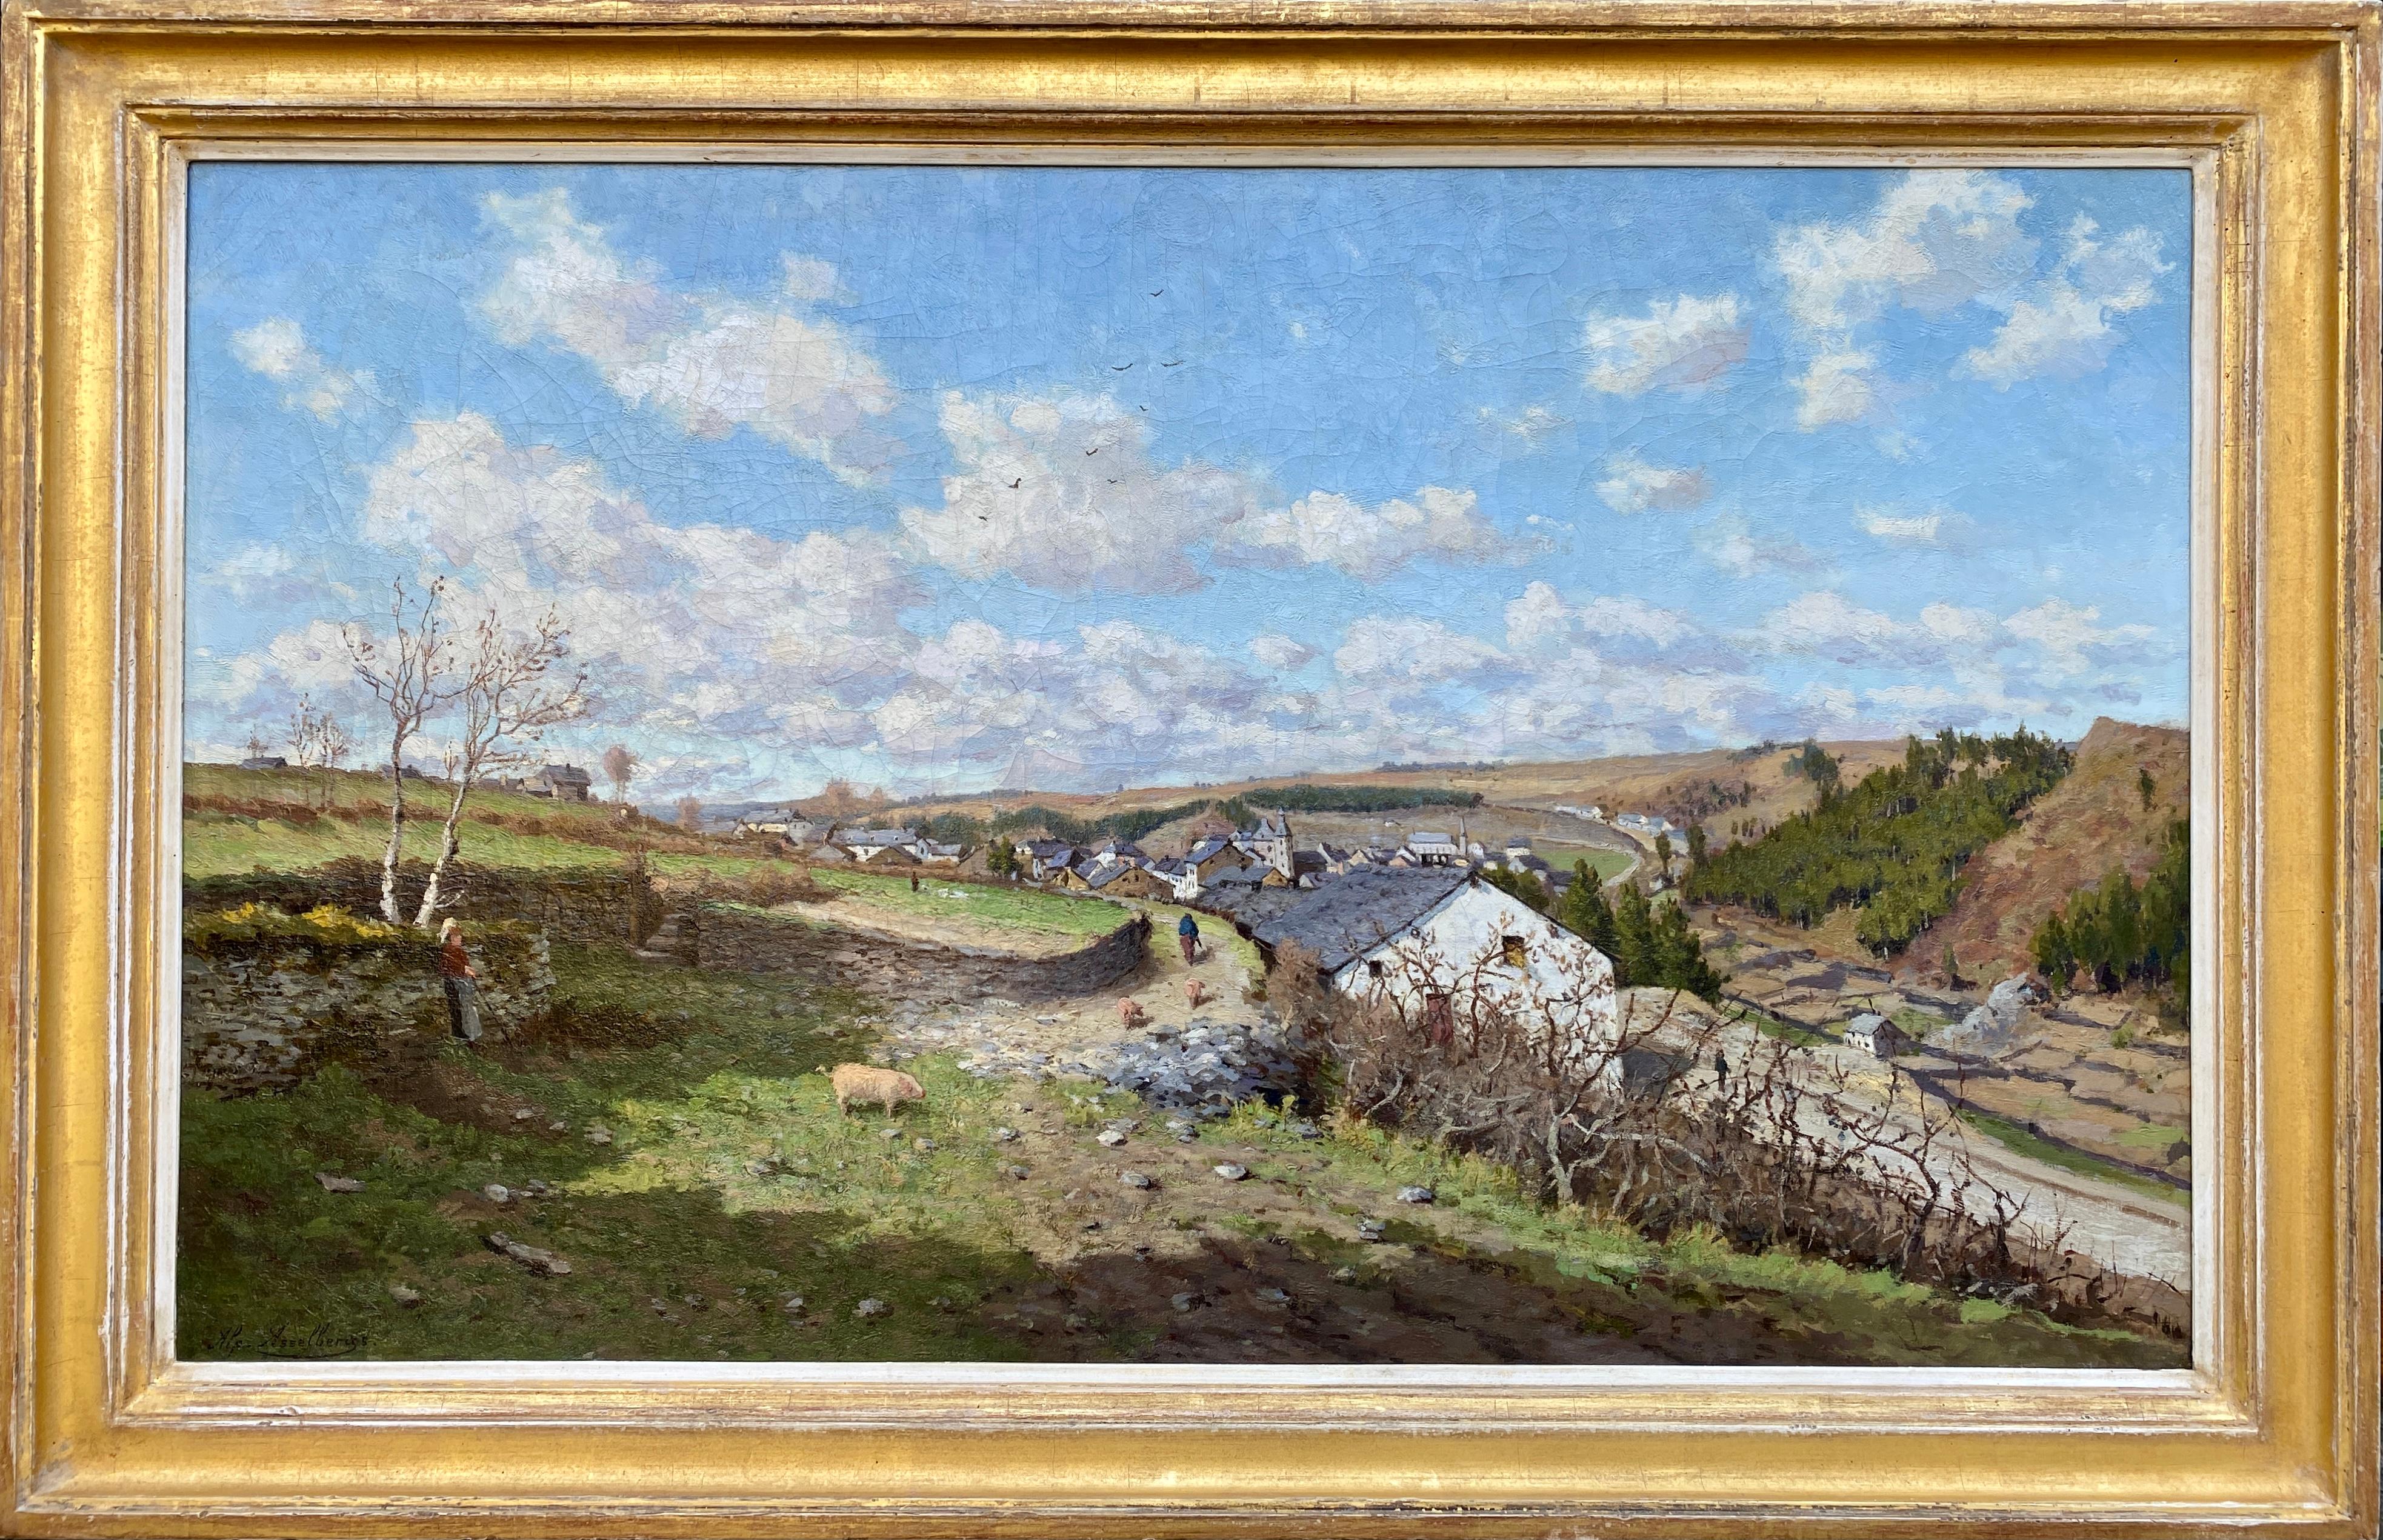 Landscape in the Ardennes

Asselbergs Alphonse
Brussels 1839 – 1916
Belgian Painter
Signature: Signed bottom left

Medium: Oil on canvas
Dimensions: Image size 60,50 x 100 cm, frame size 73,50 x 113 cm

The place this painting depicts is a small